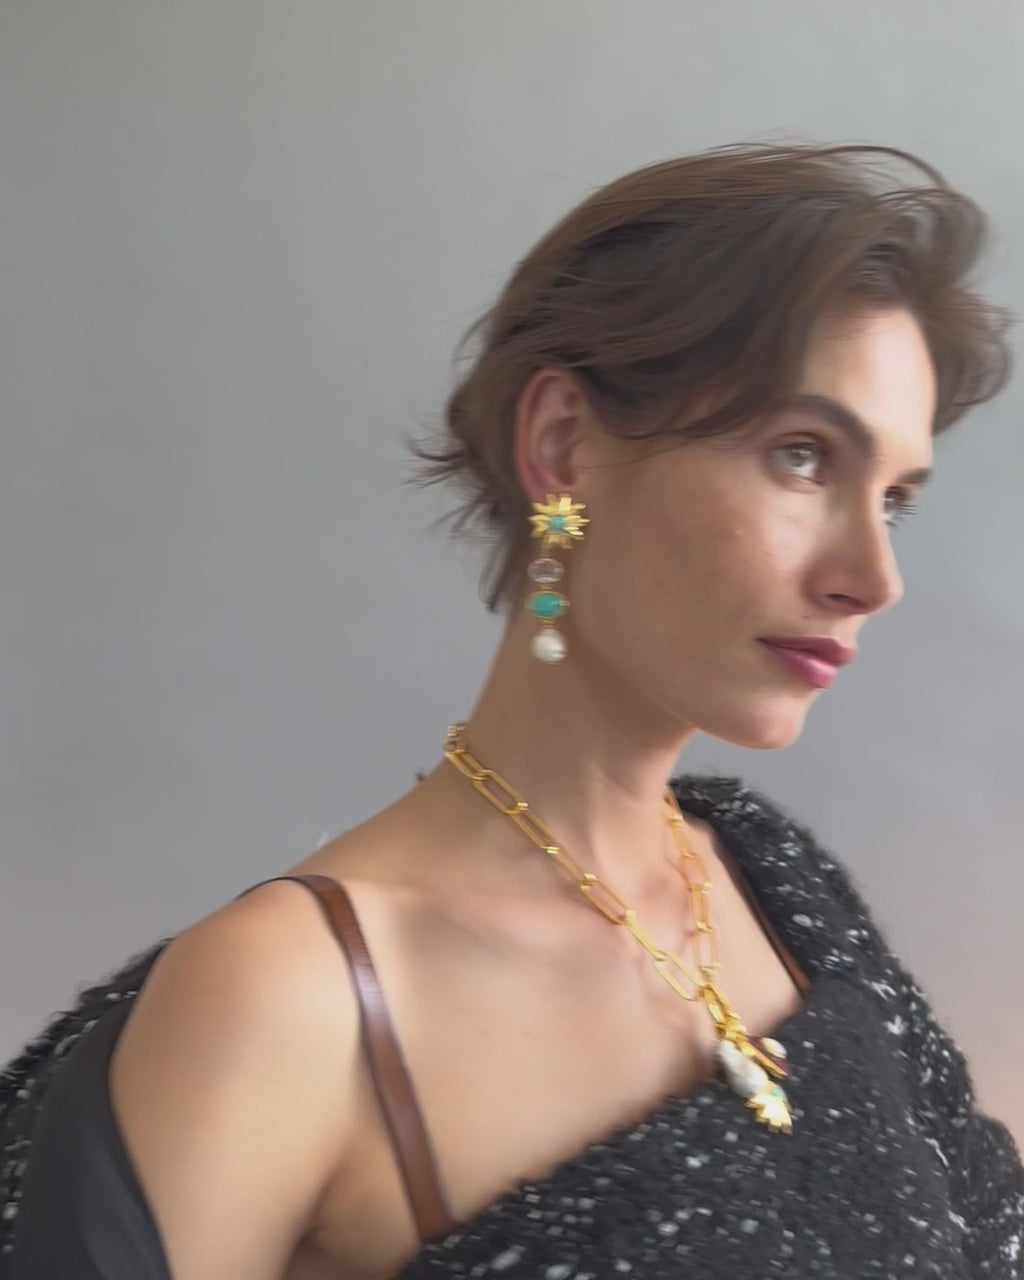 Video of model posing on grey backdrop in black textured outfit with Aphrodite Earrings and Helios Charm Necklace.